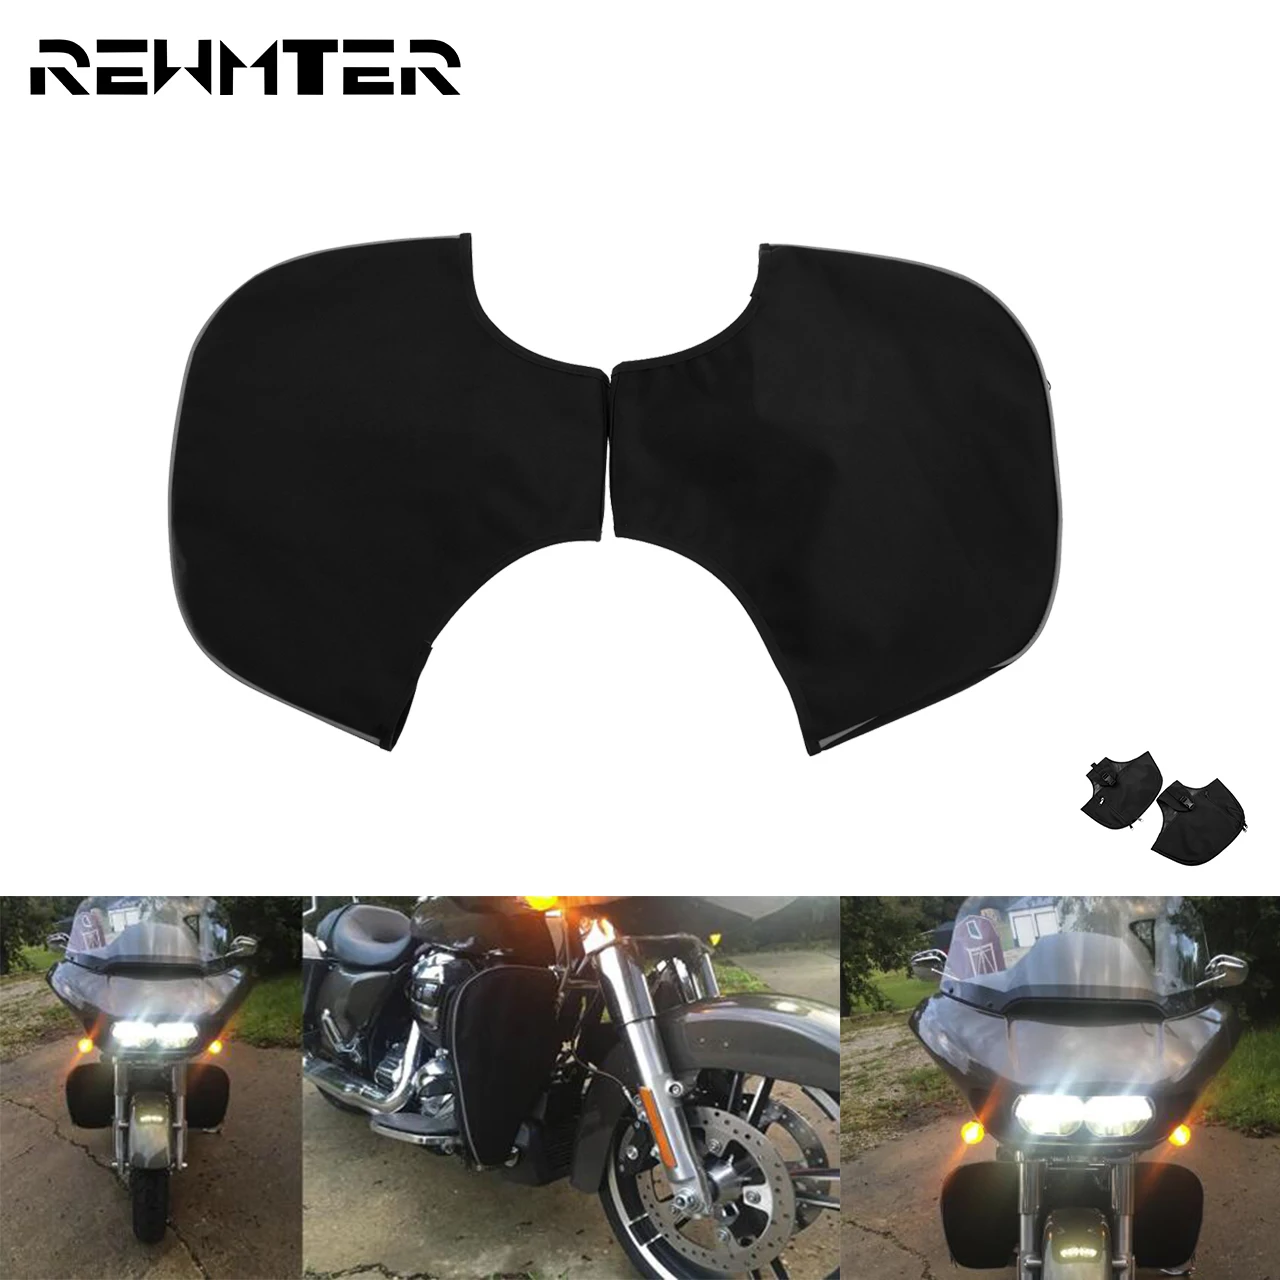 

Motorcycle Leg Warmer Chaps Soft Lowers Engine Guard Cover Bags For Harley Touring Electra Street Glide Road King FLHR 1980-2021